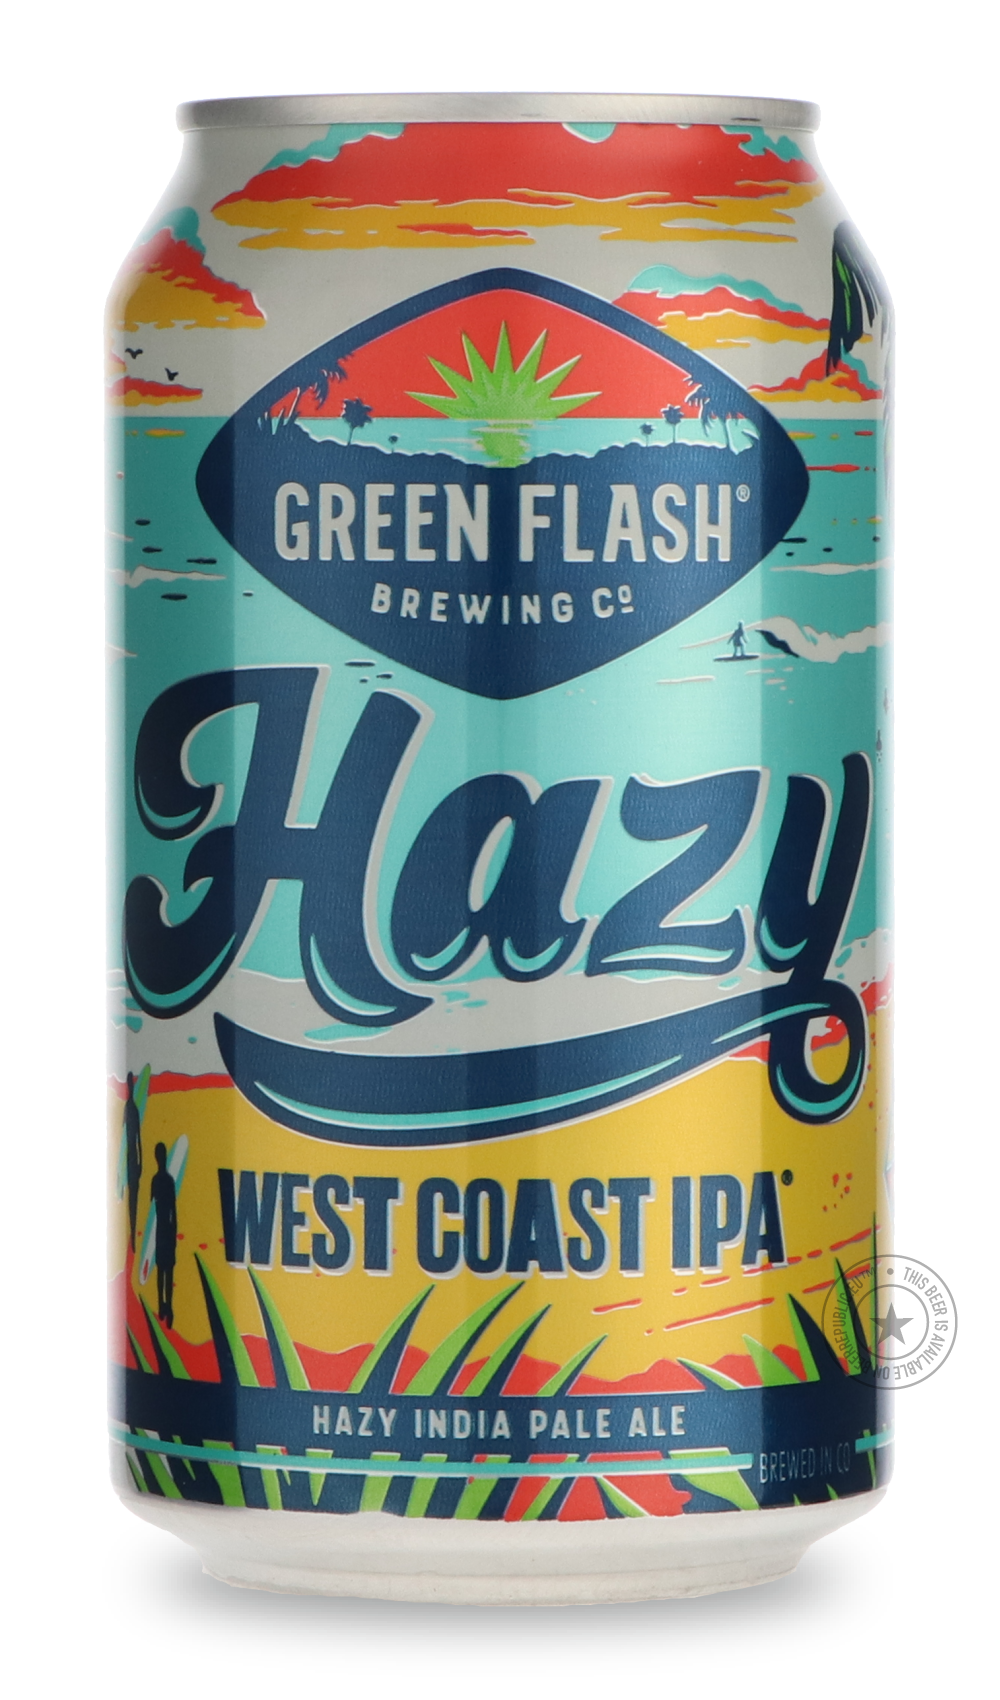 -Green Flash- Hazy West Coast IPA-IPA- Only @ Beer Republic - The best online beer store for American & Canadian craft beer - Buy beer online from the USA and Canada - Bier online kopen - Amerikaans bier kopen - Craft beer store - Craft beer kopen - Amerikanisch bier kaufen - Bier online kaufen - Acheter biere online - IPA - Stout - Porter - New England IPA - Hazy IPA - Imperial Stout - Barrel Aged - Barrel Aged Imperial Stout - Brown - Dark beer - Blond - Blonde - Pilsner - Lager - Wheat - Weizen - Amber -